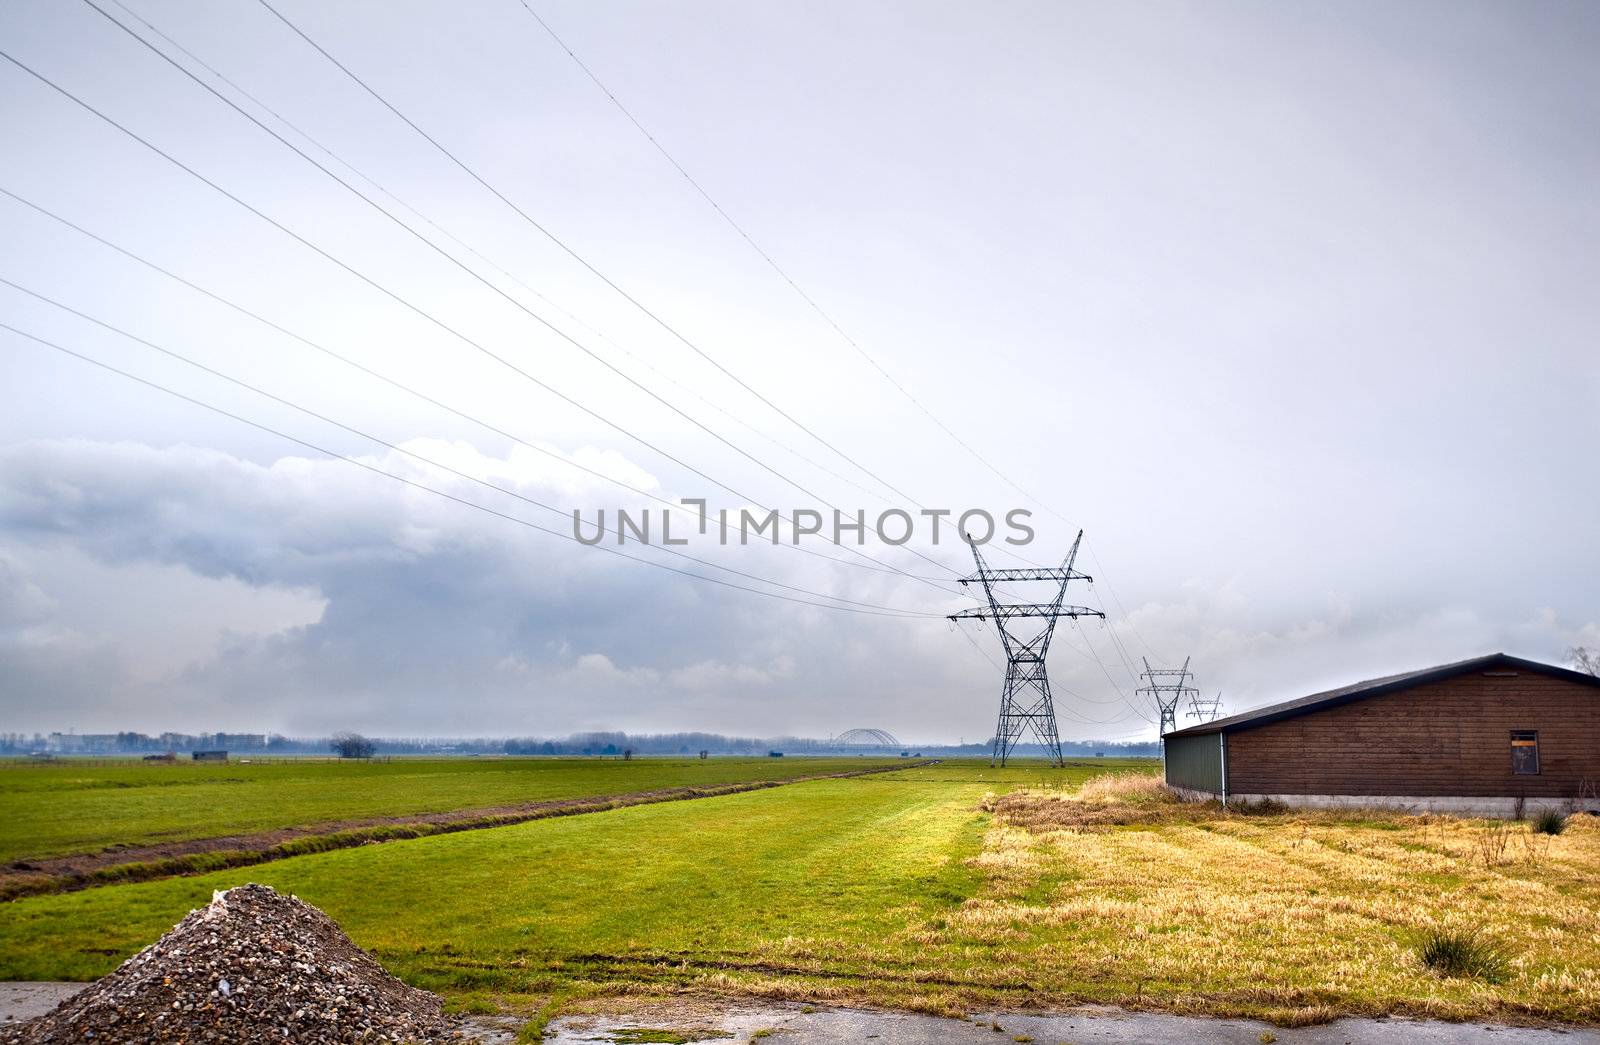 view on Dutch farm with fields and high voltage line